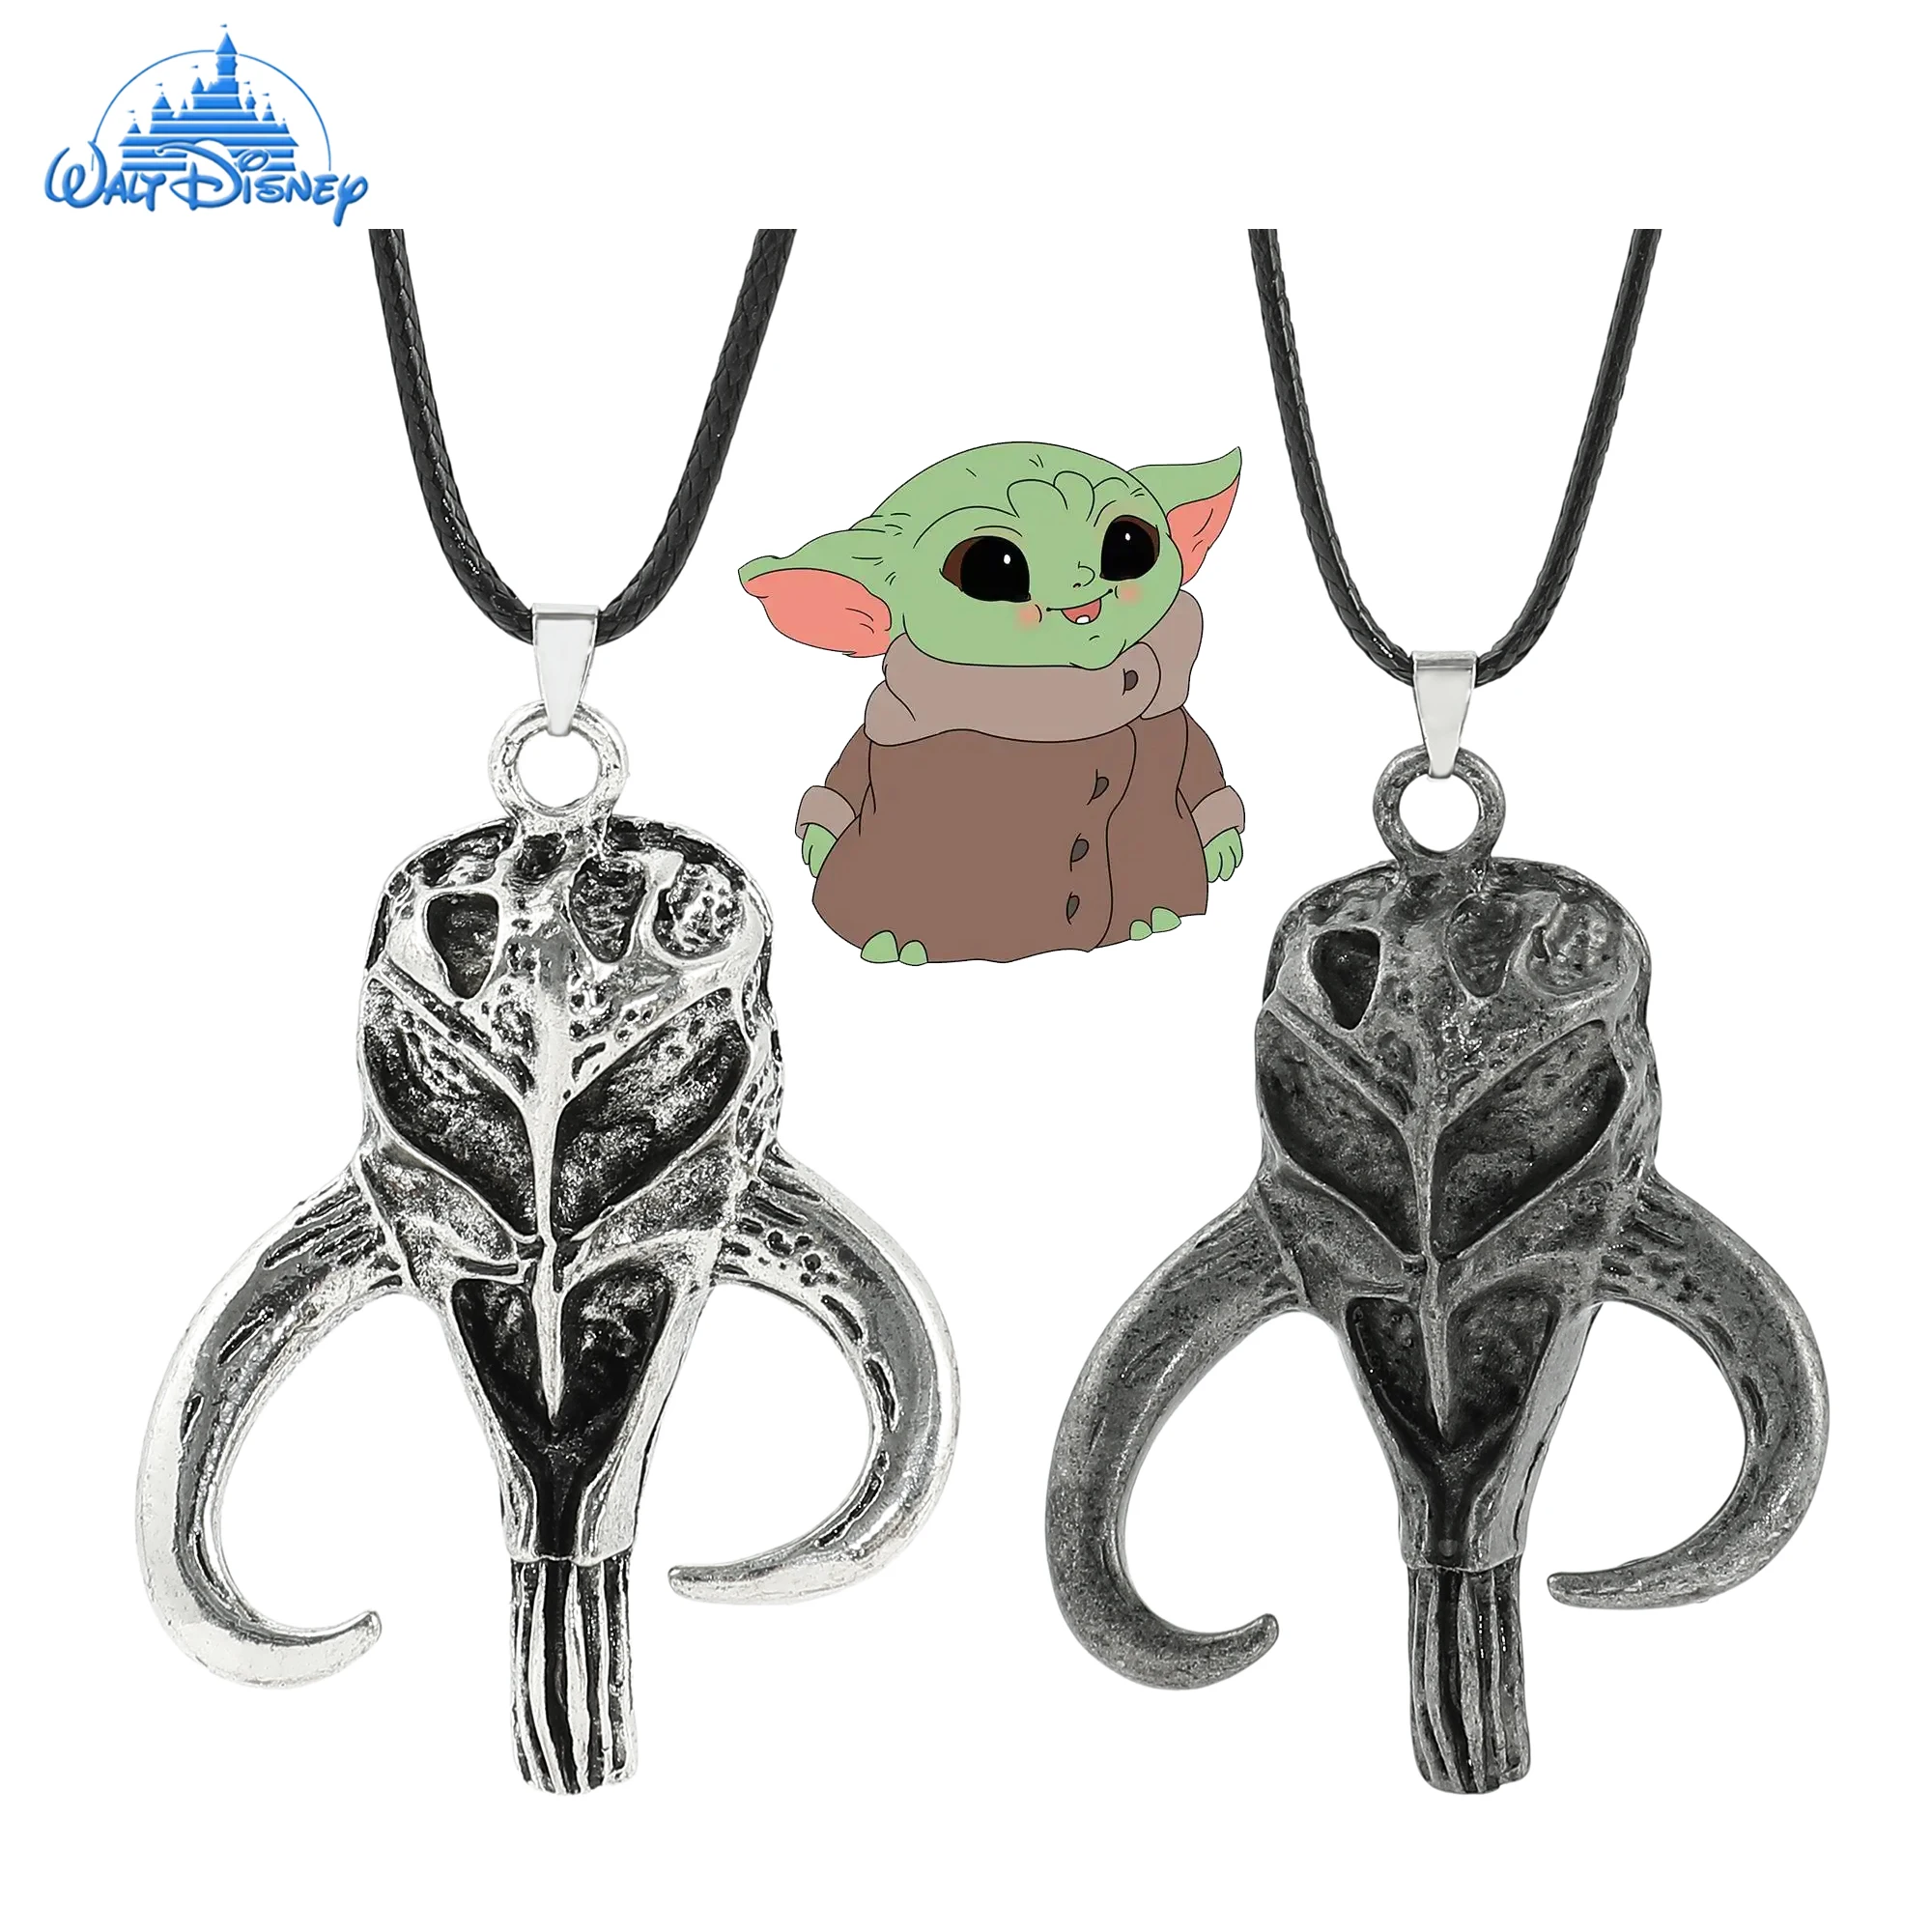 

Disney Movie Star Wars Retro Mandalorian Necklace Yoda Baby Leather Cord Necklace Christmas Jewelry Accessories Gift for Men